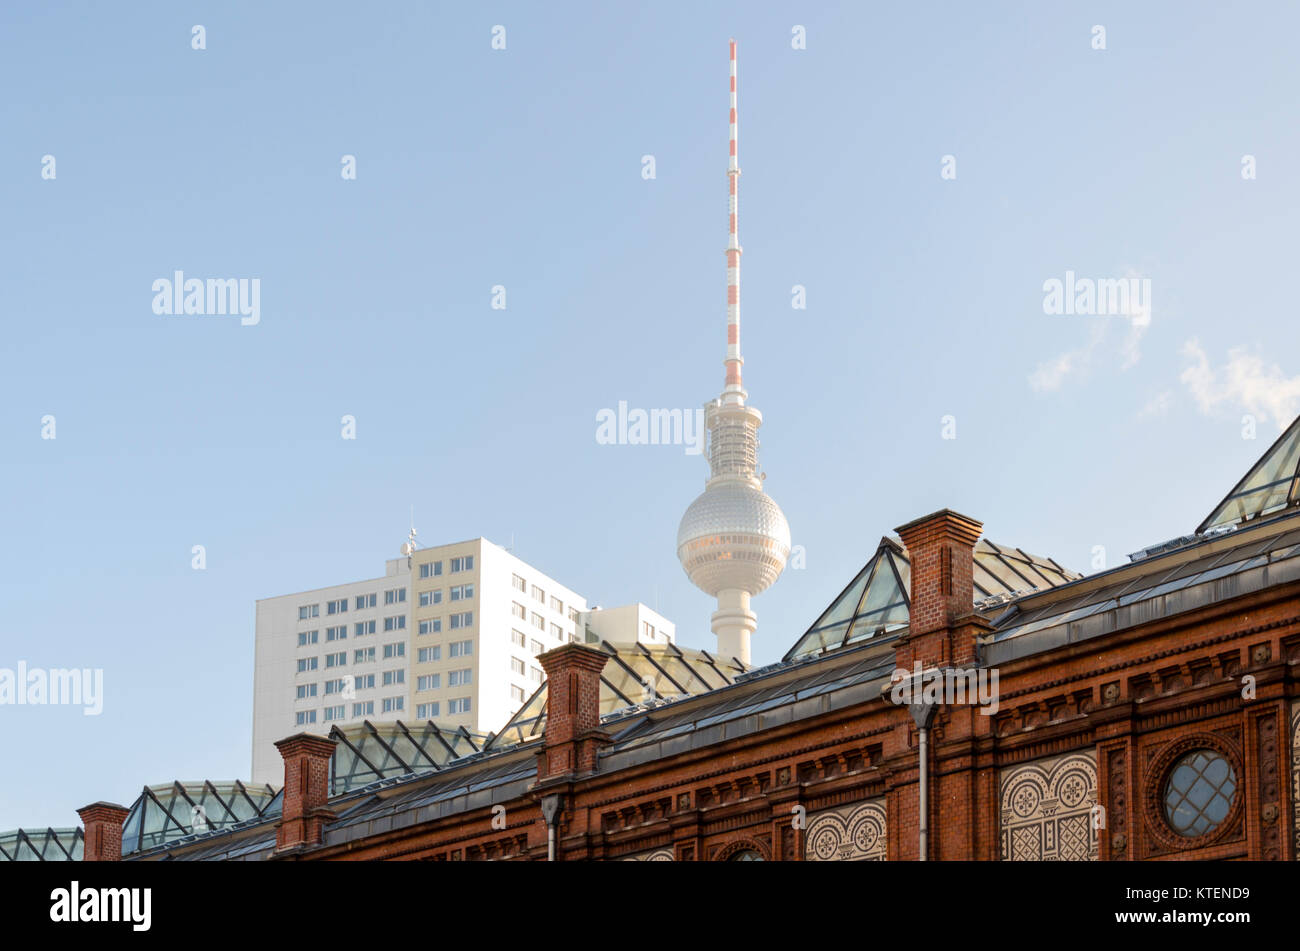 Elevated railway and train, Hackeschen Markt with Berliner Fernsehturm Television TV Tower in background, Berlin, Germany, Stock Photo